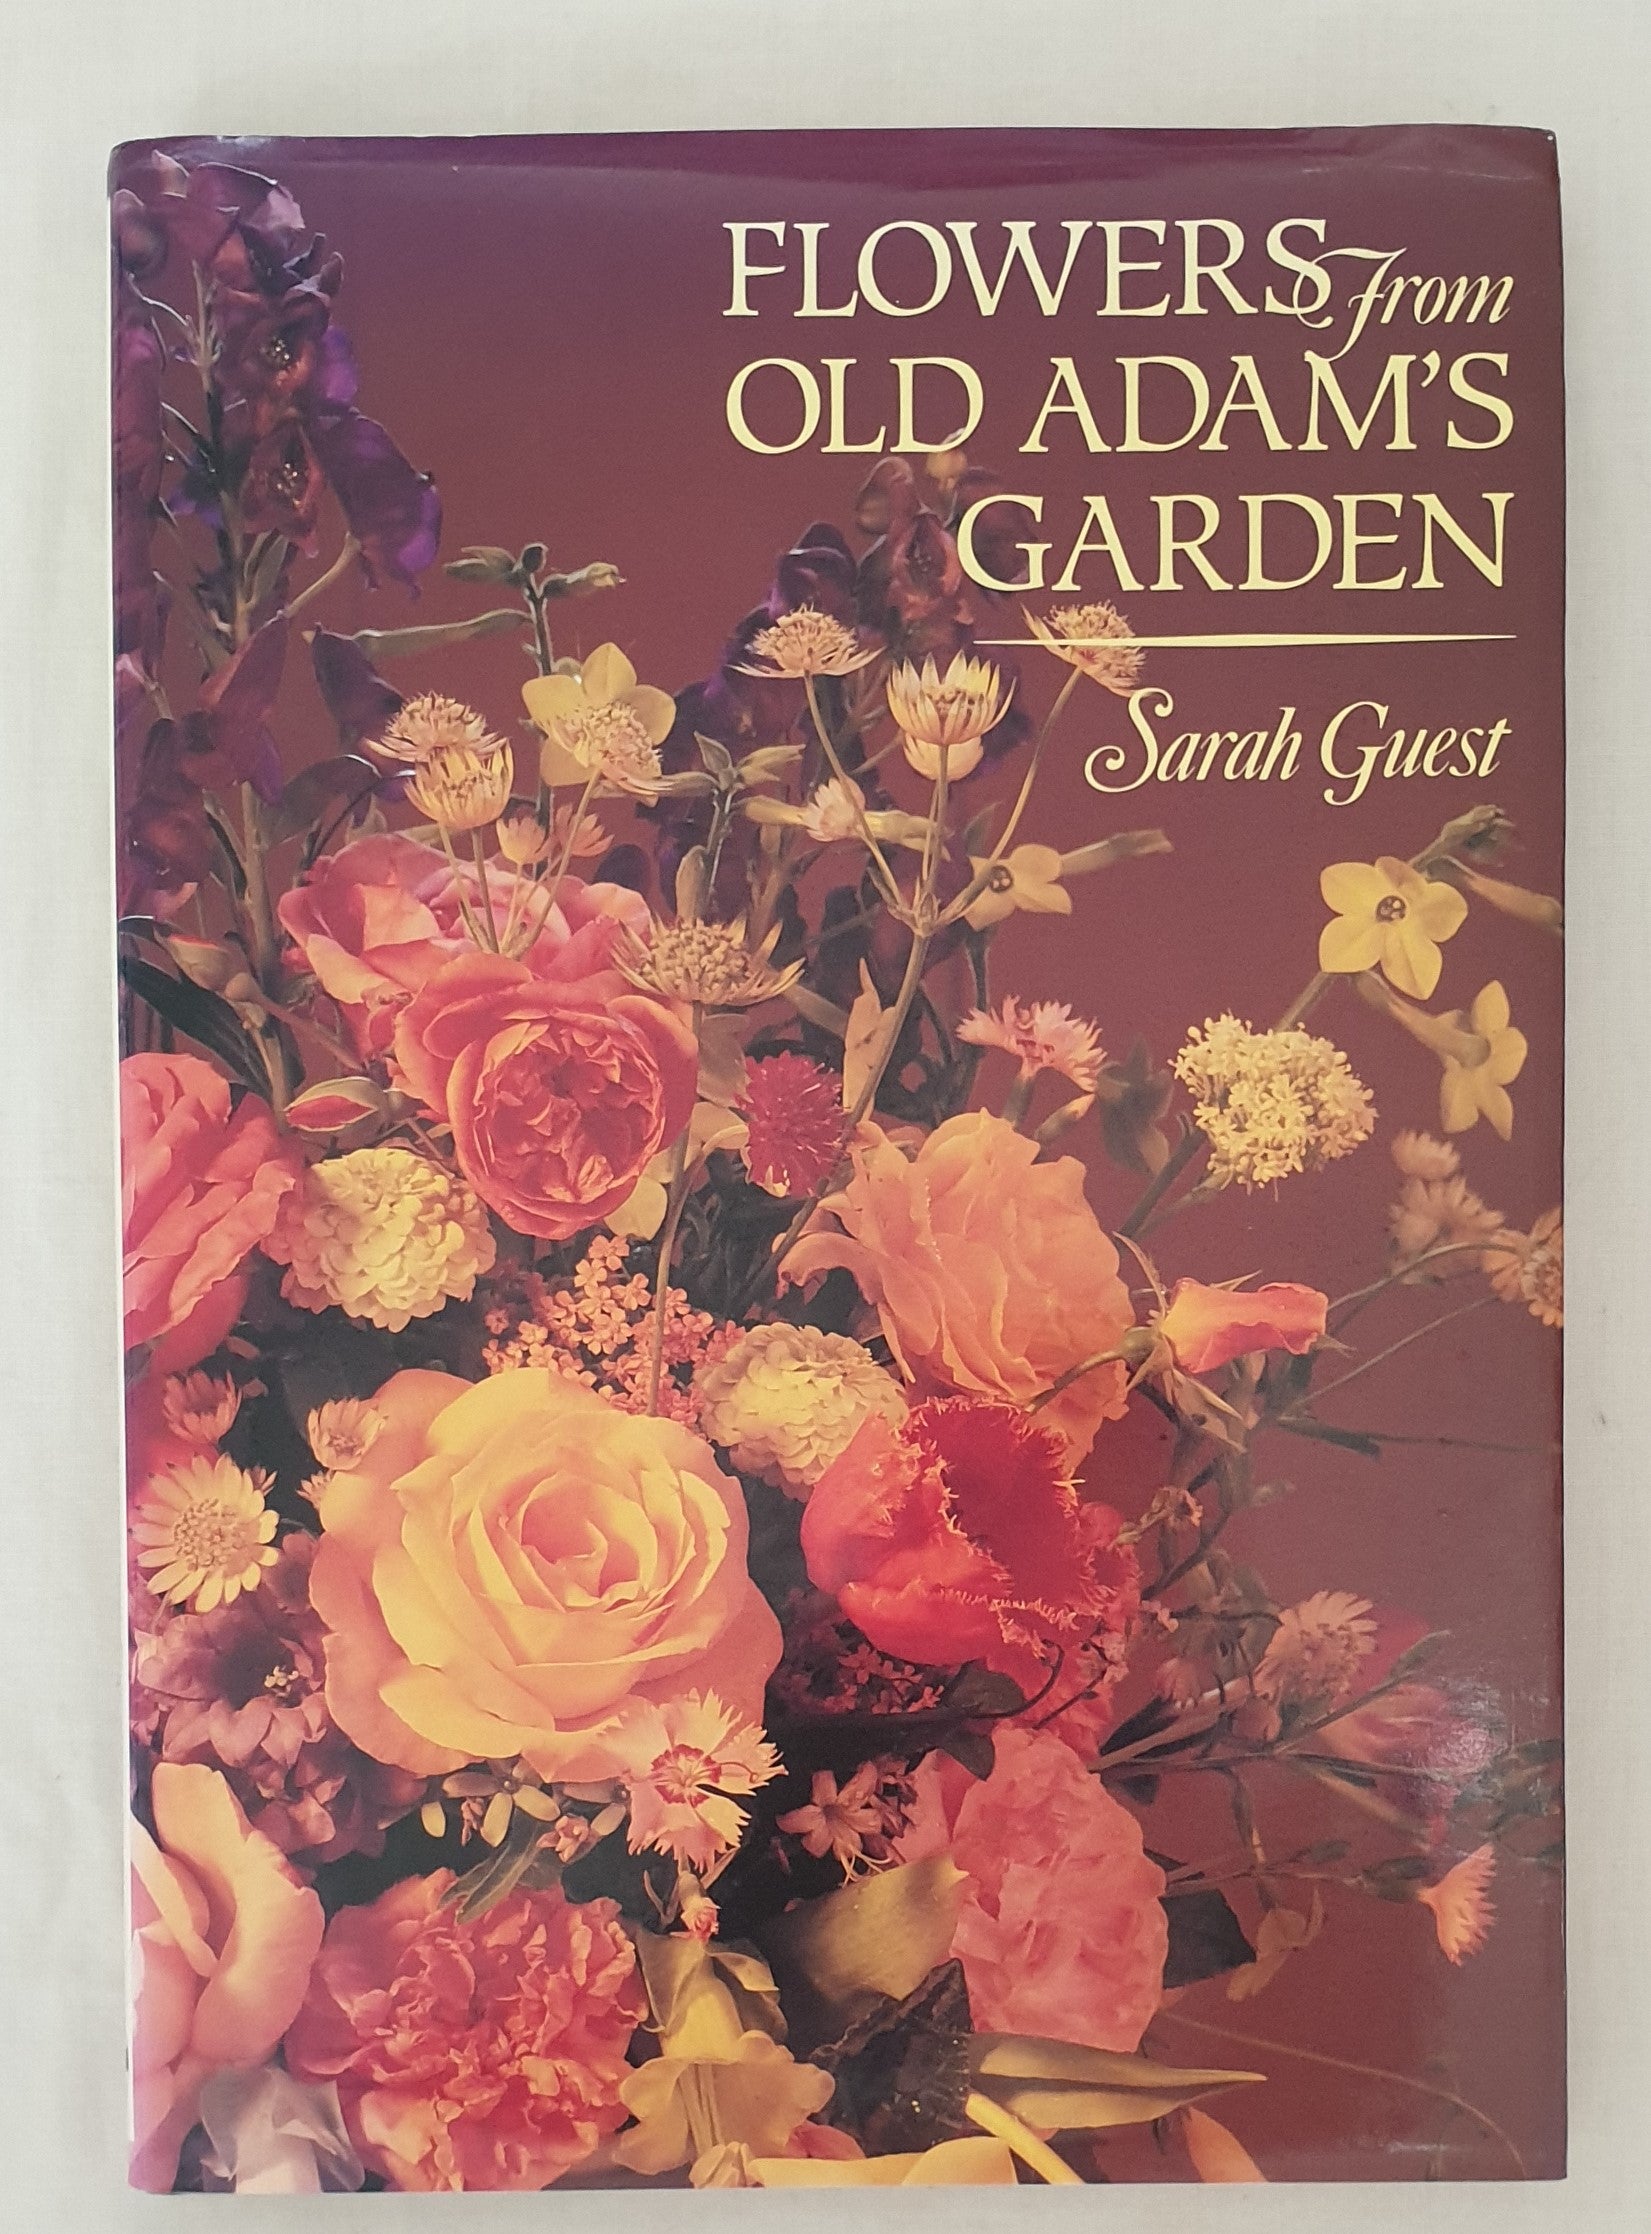 Flowers from Old Adam's Garden by Sarah Guest